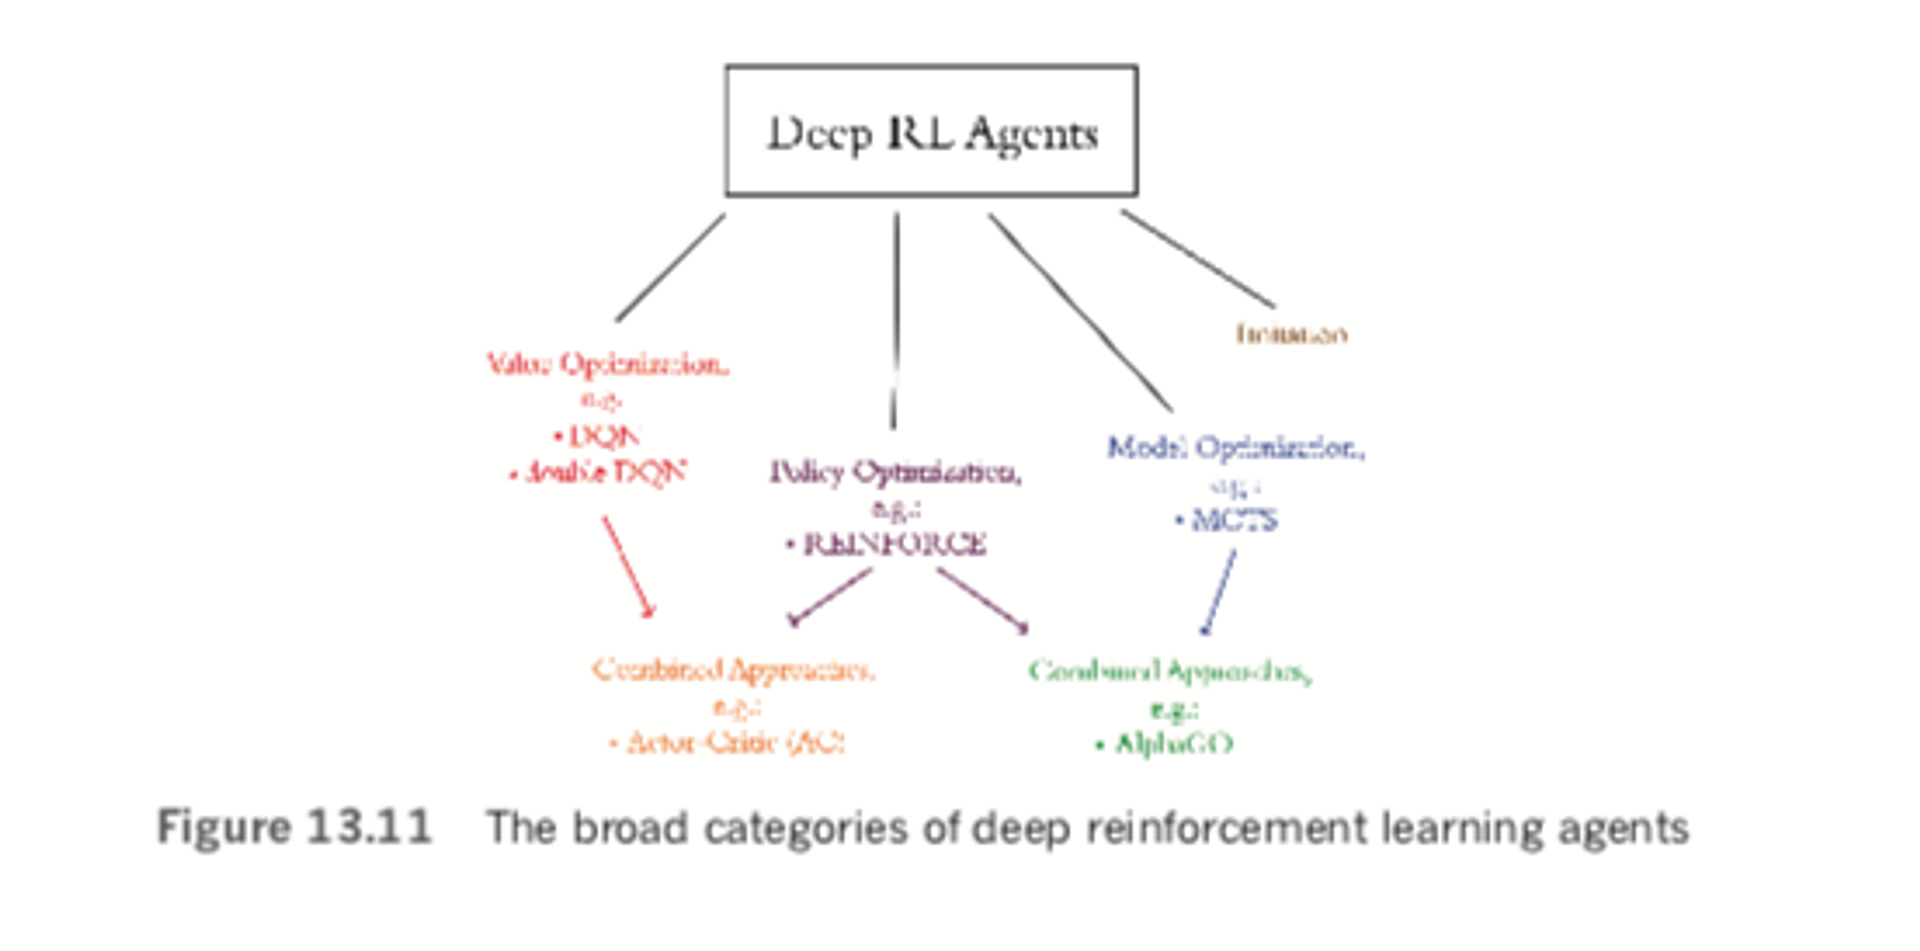 Categories of deep reinforcement learning agents